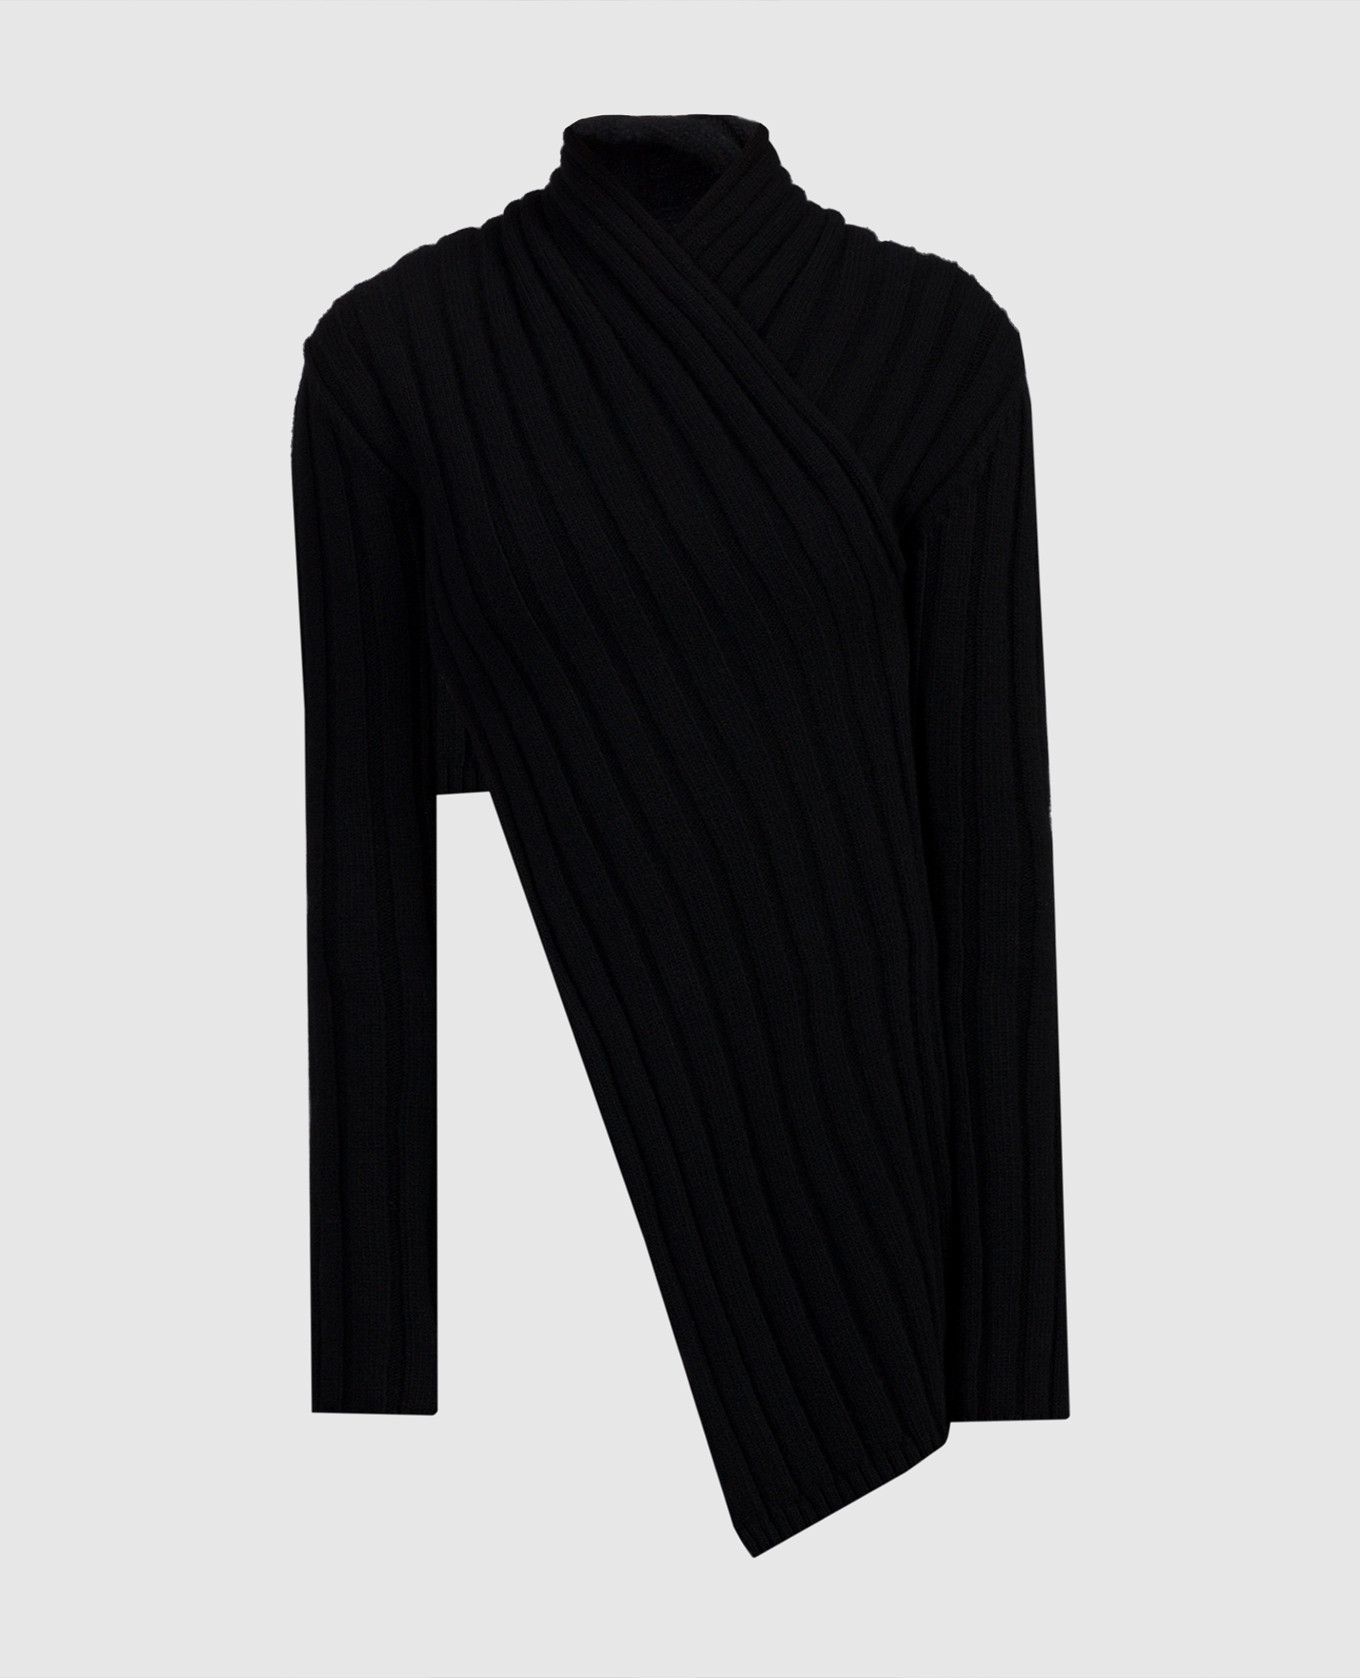 Black top made of wool with slits